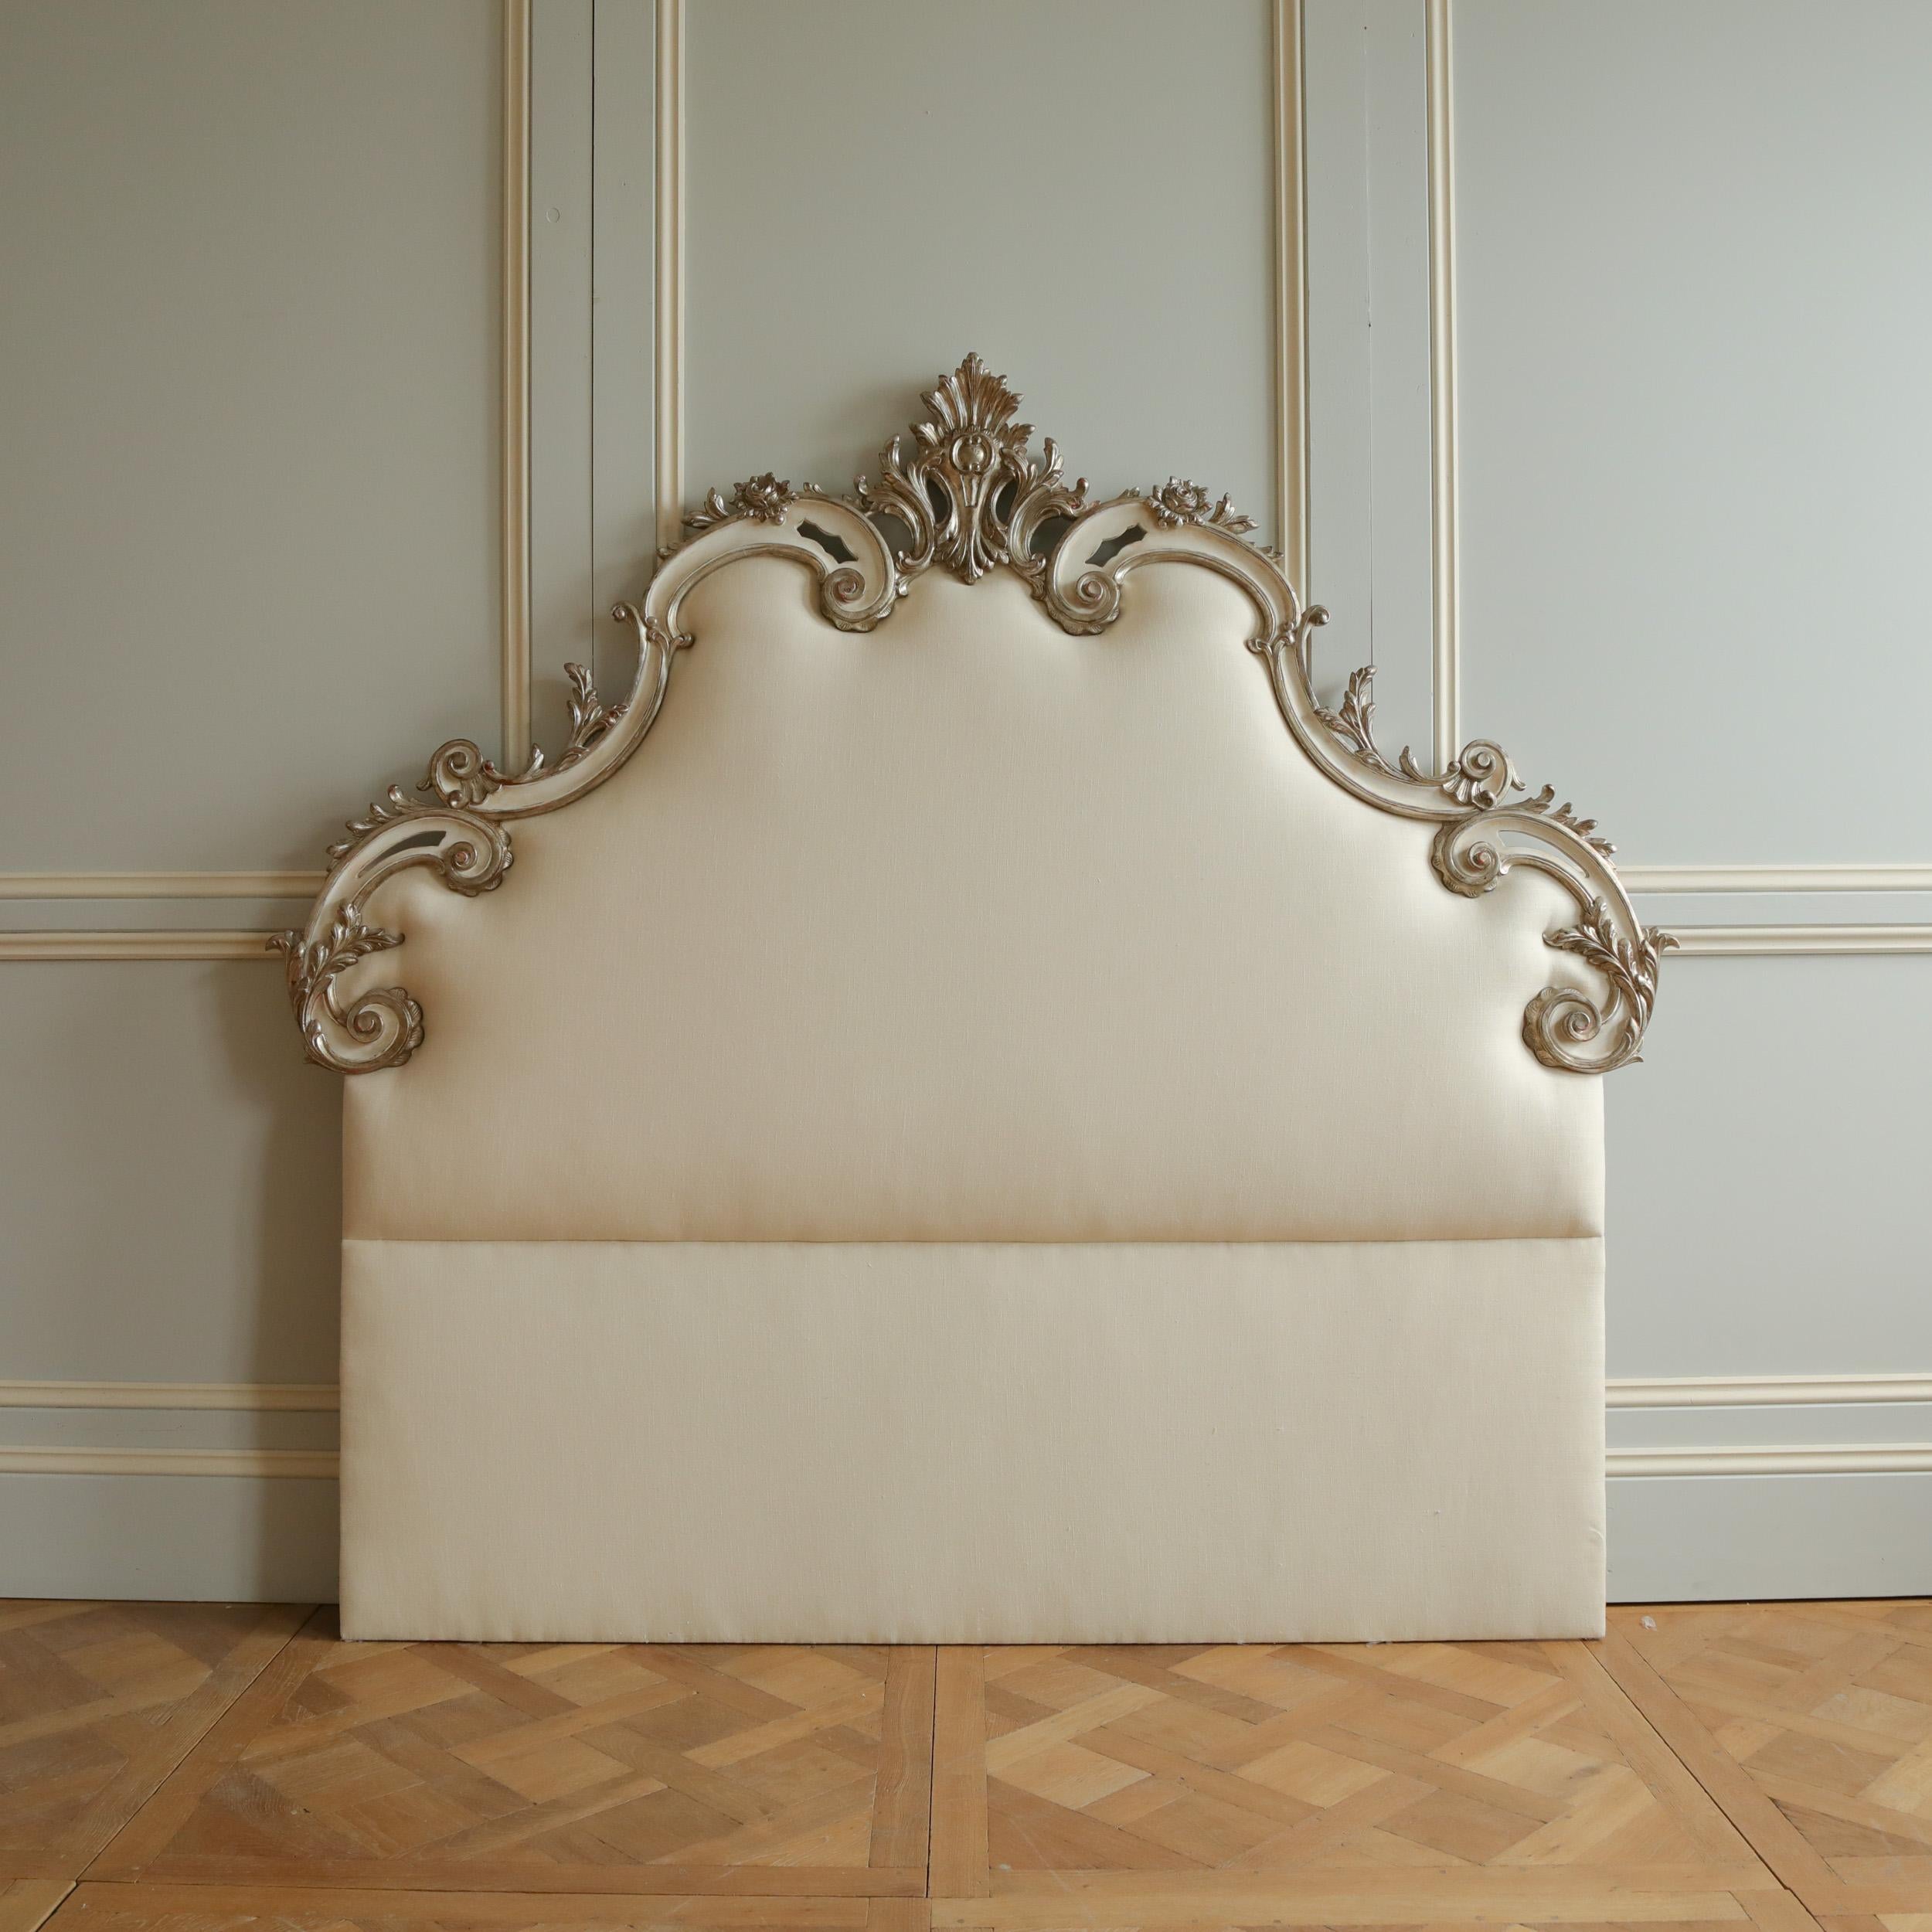 British Rococo Headboard in Antique White with Silver Highlights For Sale